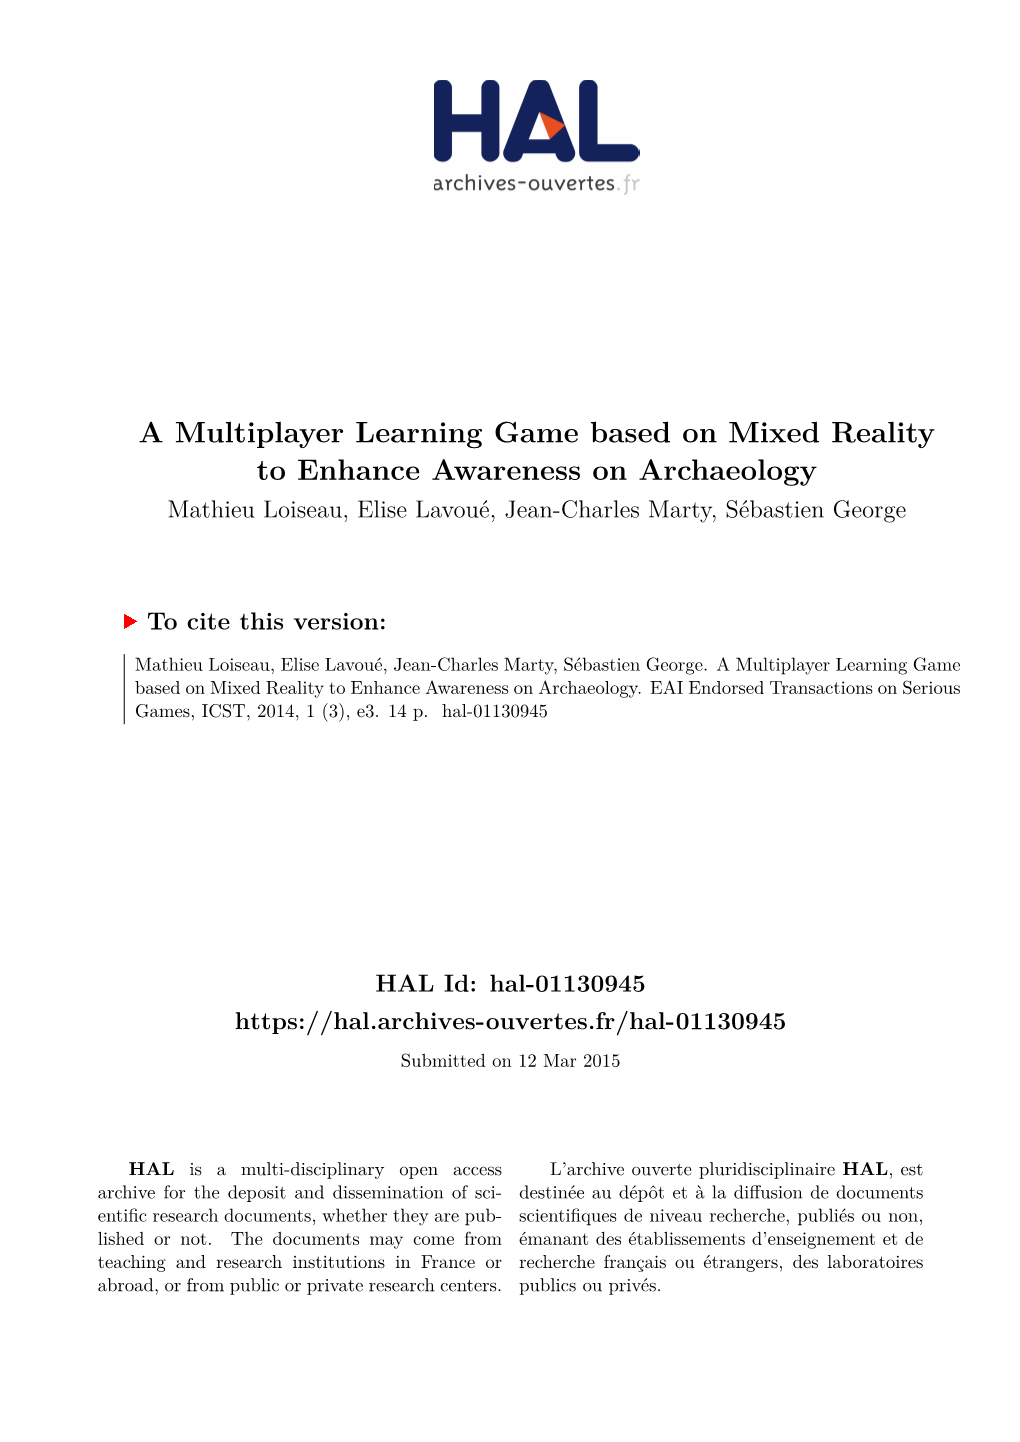 A Multiplayer Learning Game Based on Mixed Reality to Enhance Awareness on Archaeology Mathieu Loiseau, Elise Lavoué, Jean-Charles Marty, Sébastien George